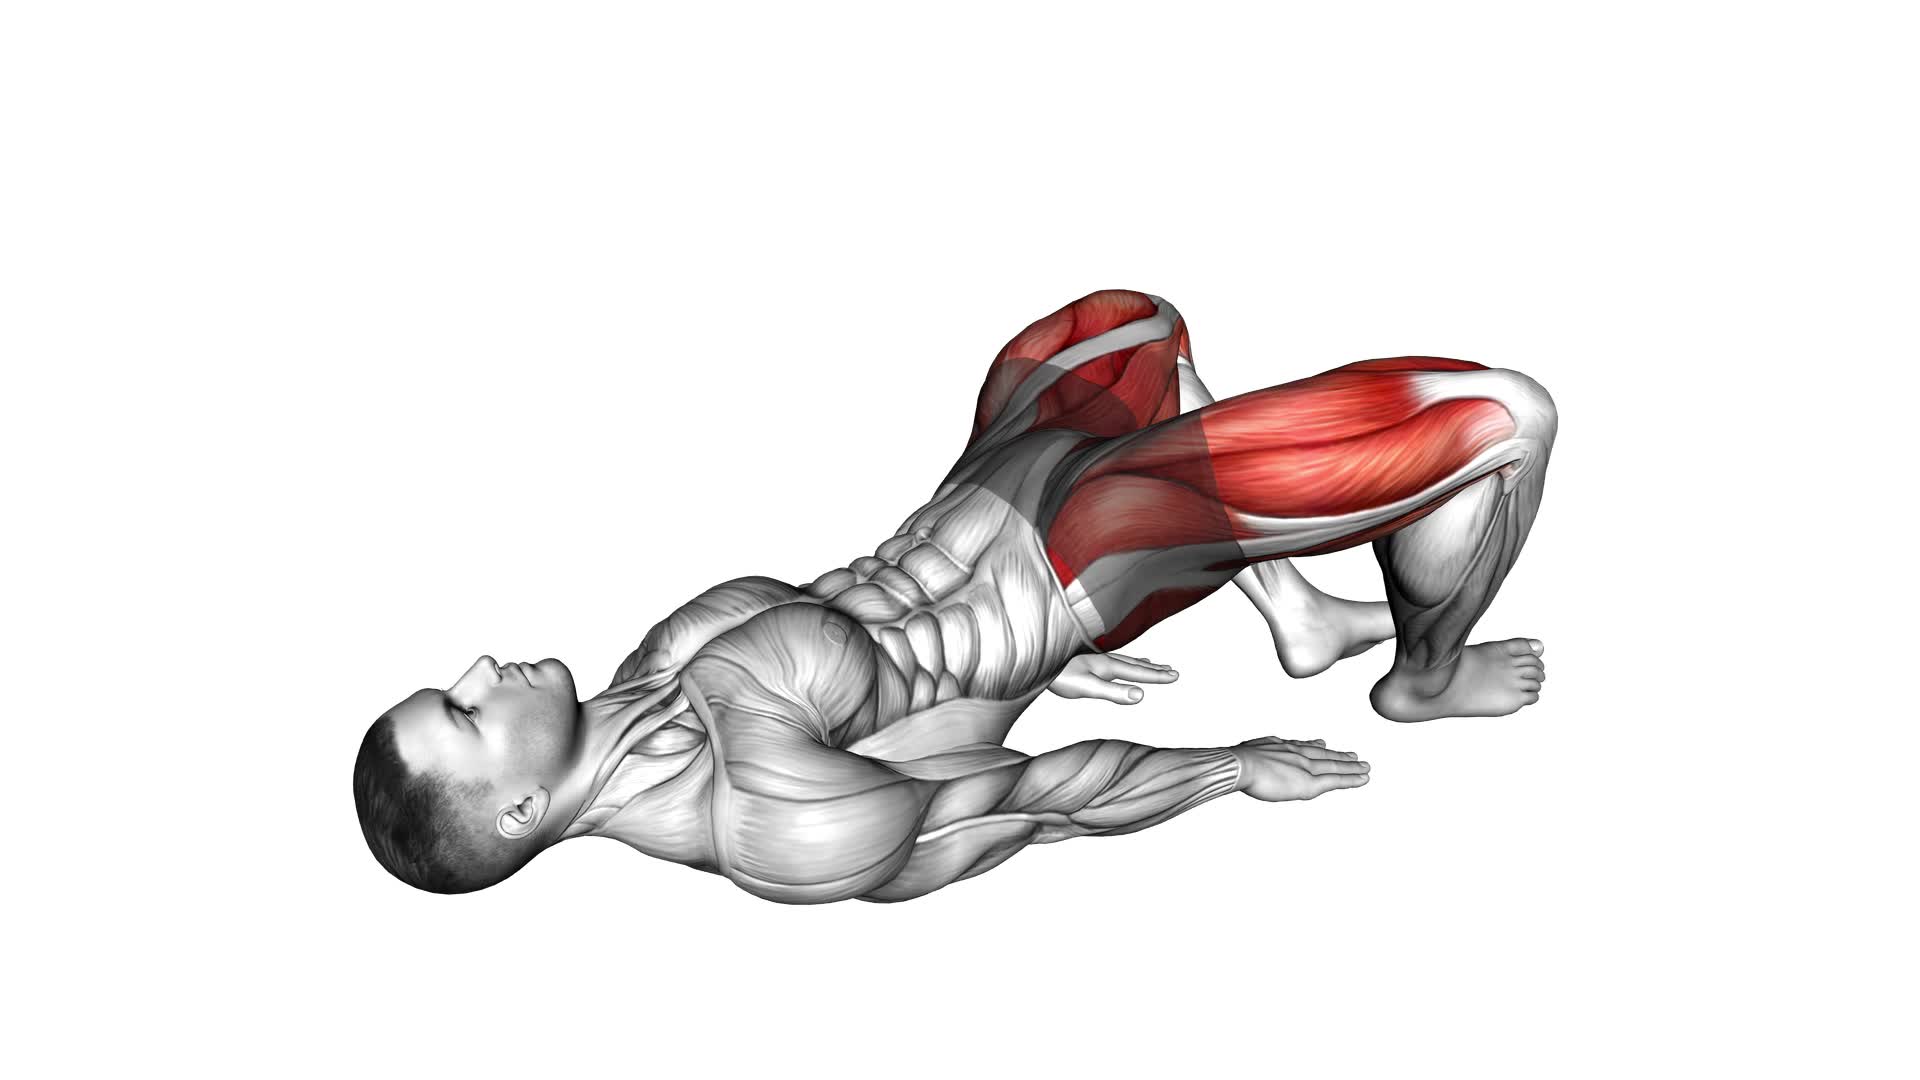 Glute Bridge Hip Abduction (male) - Video Exercise Guide & Tips